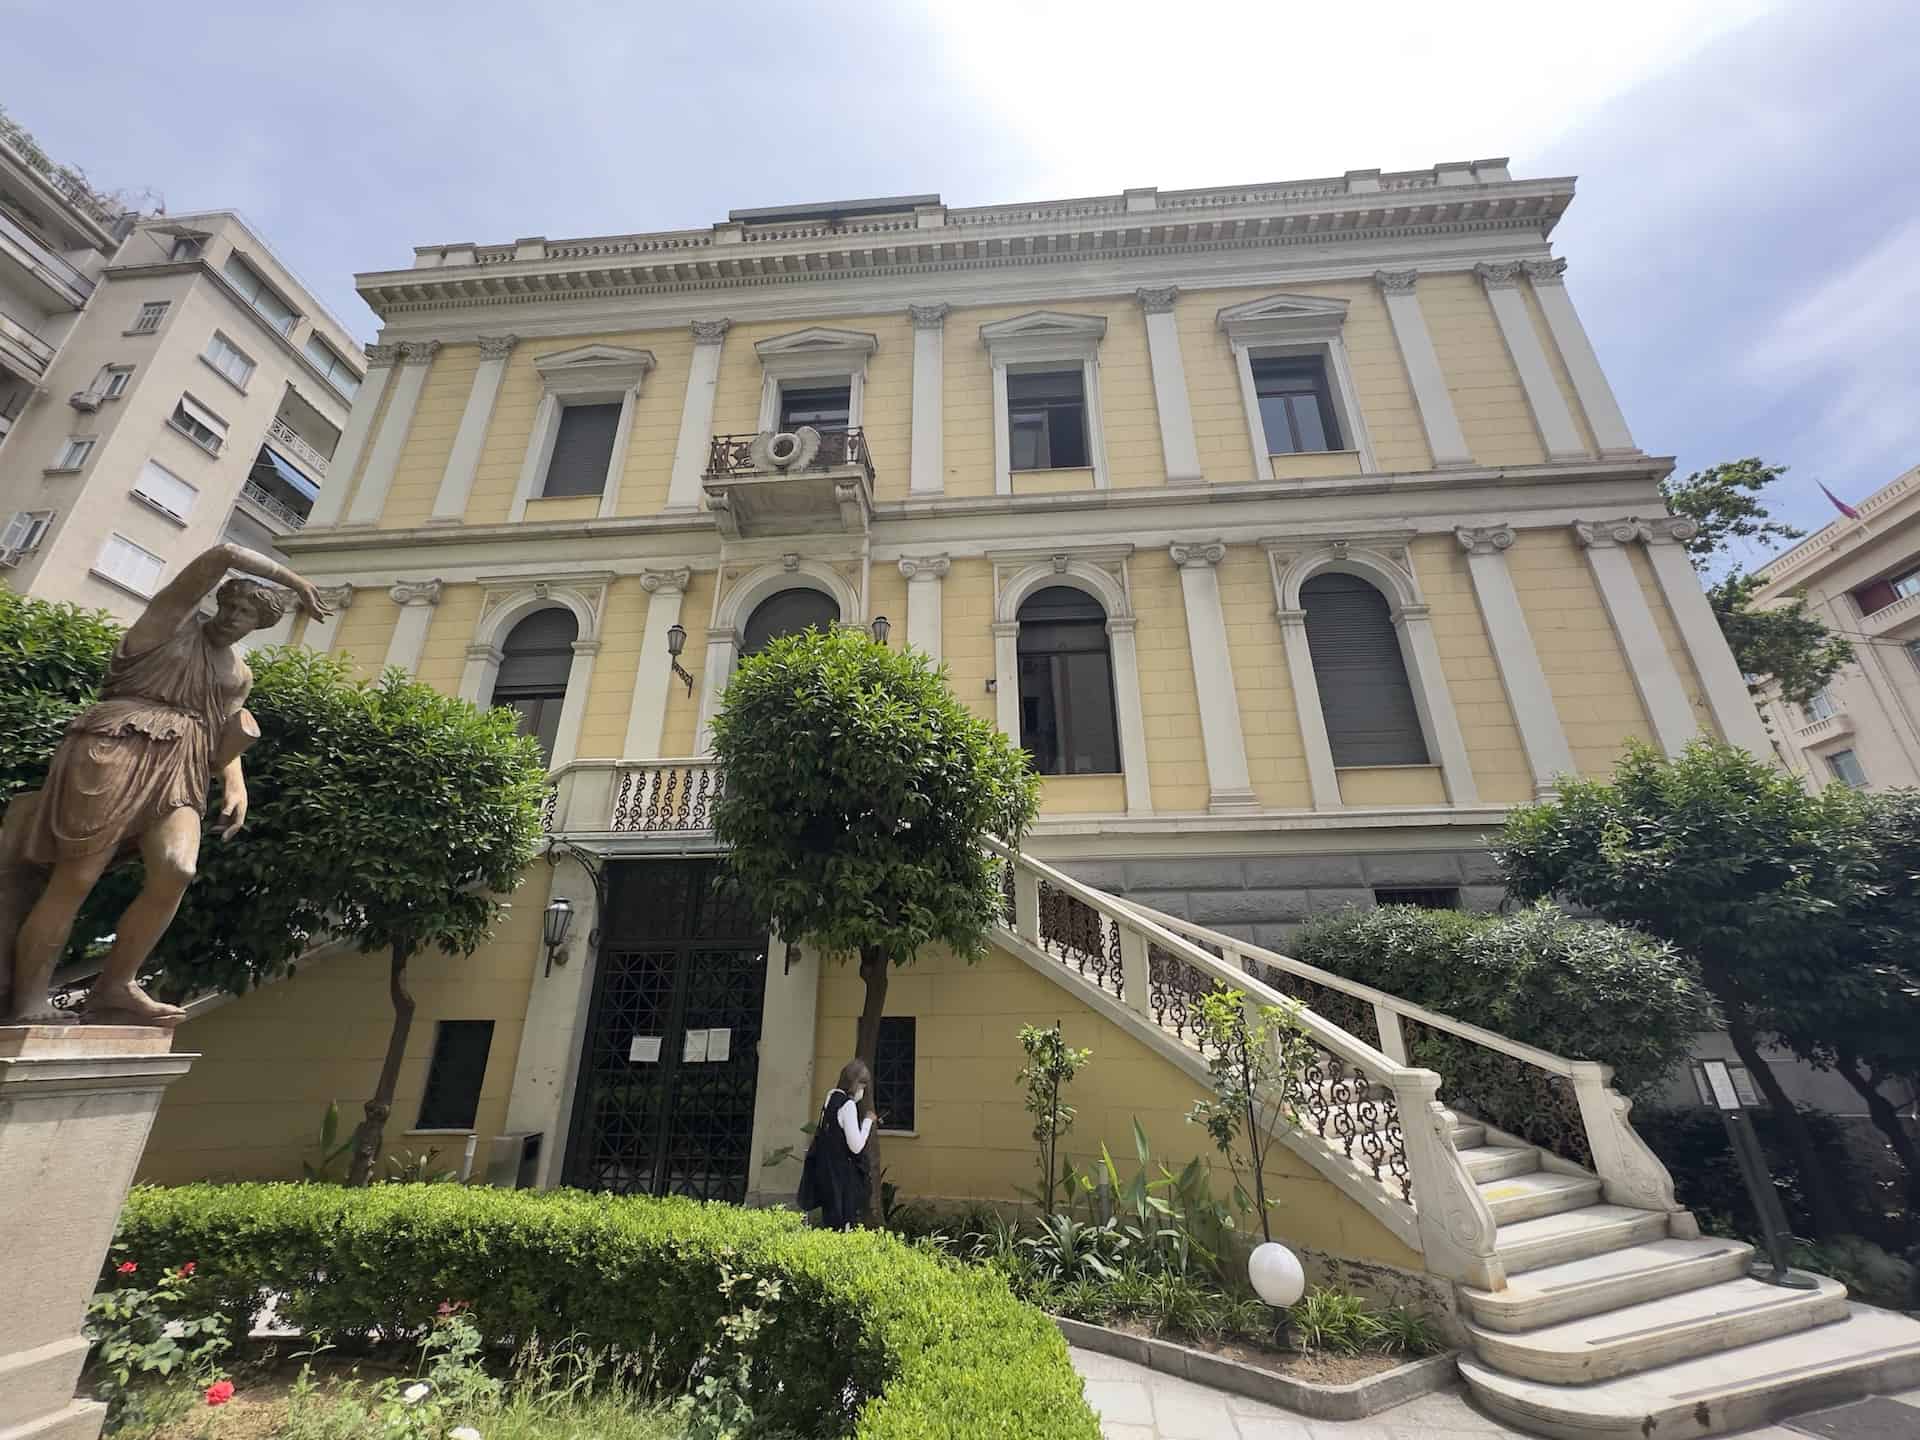 Numismatic Museum in Athens, Greece